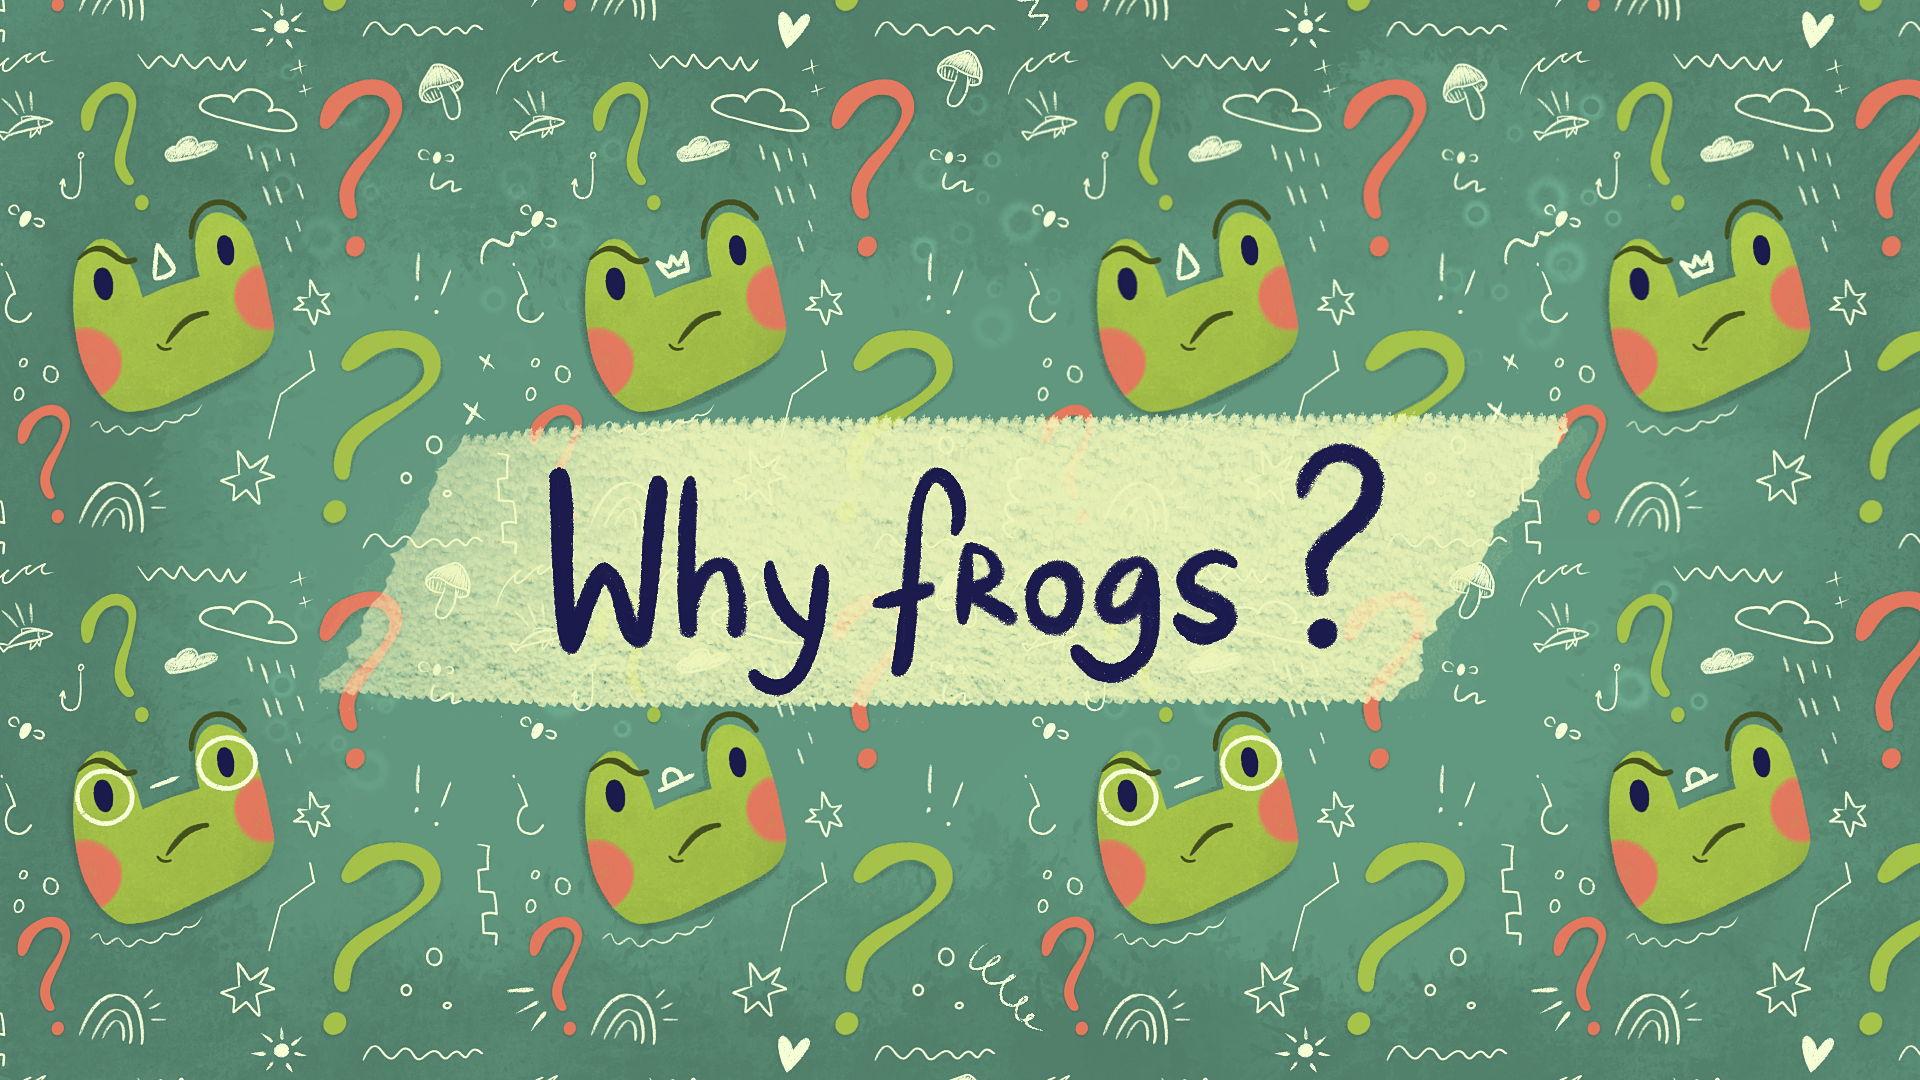 This post is an attempt to explain why frogs were chosen as the protagonists of our first game.